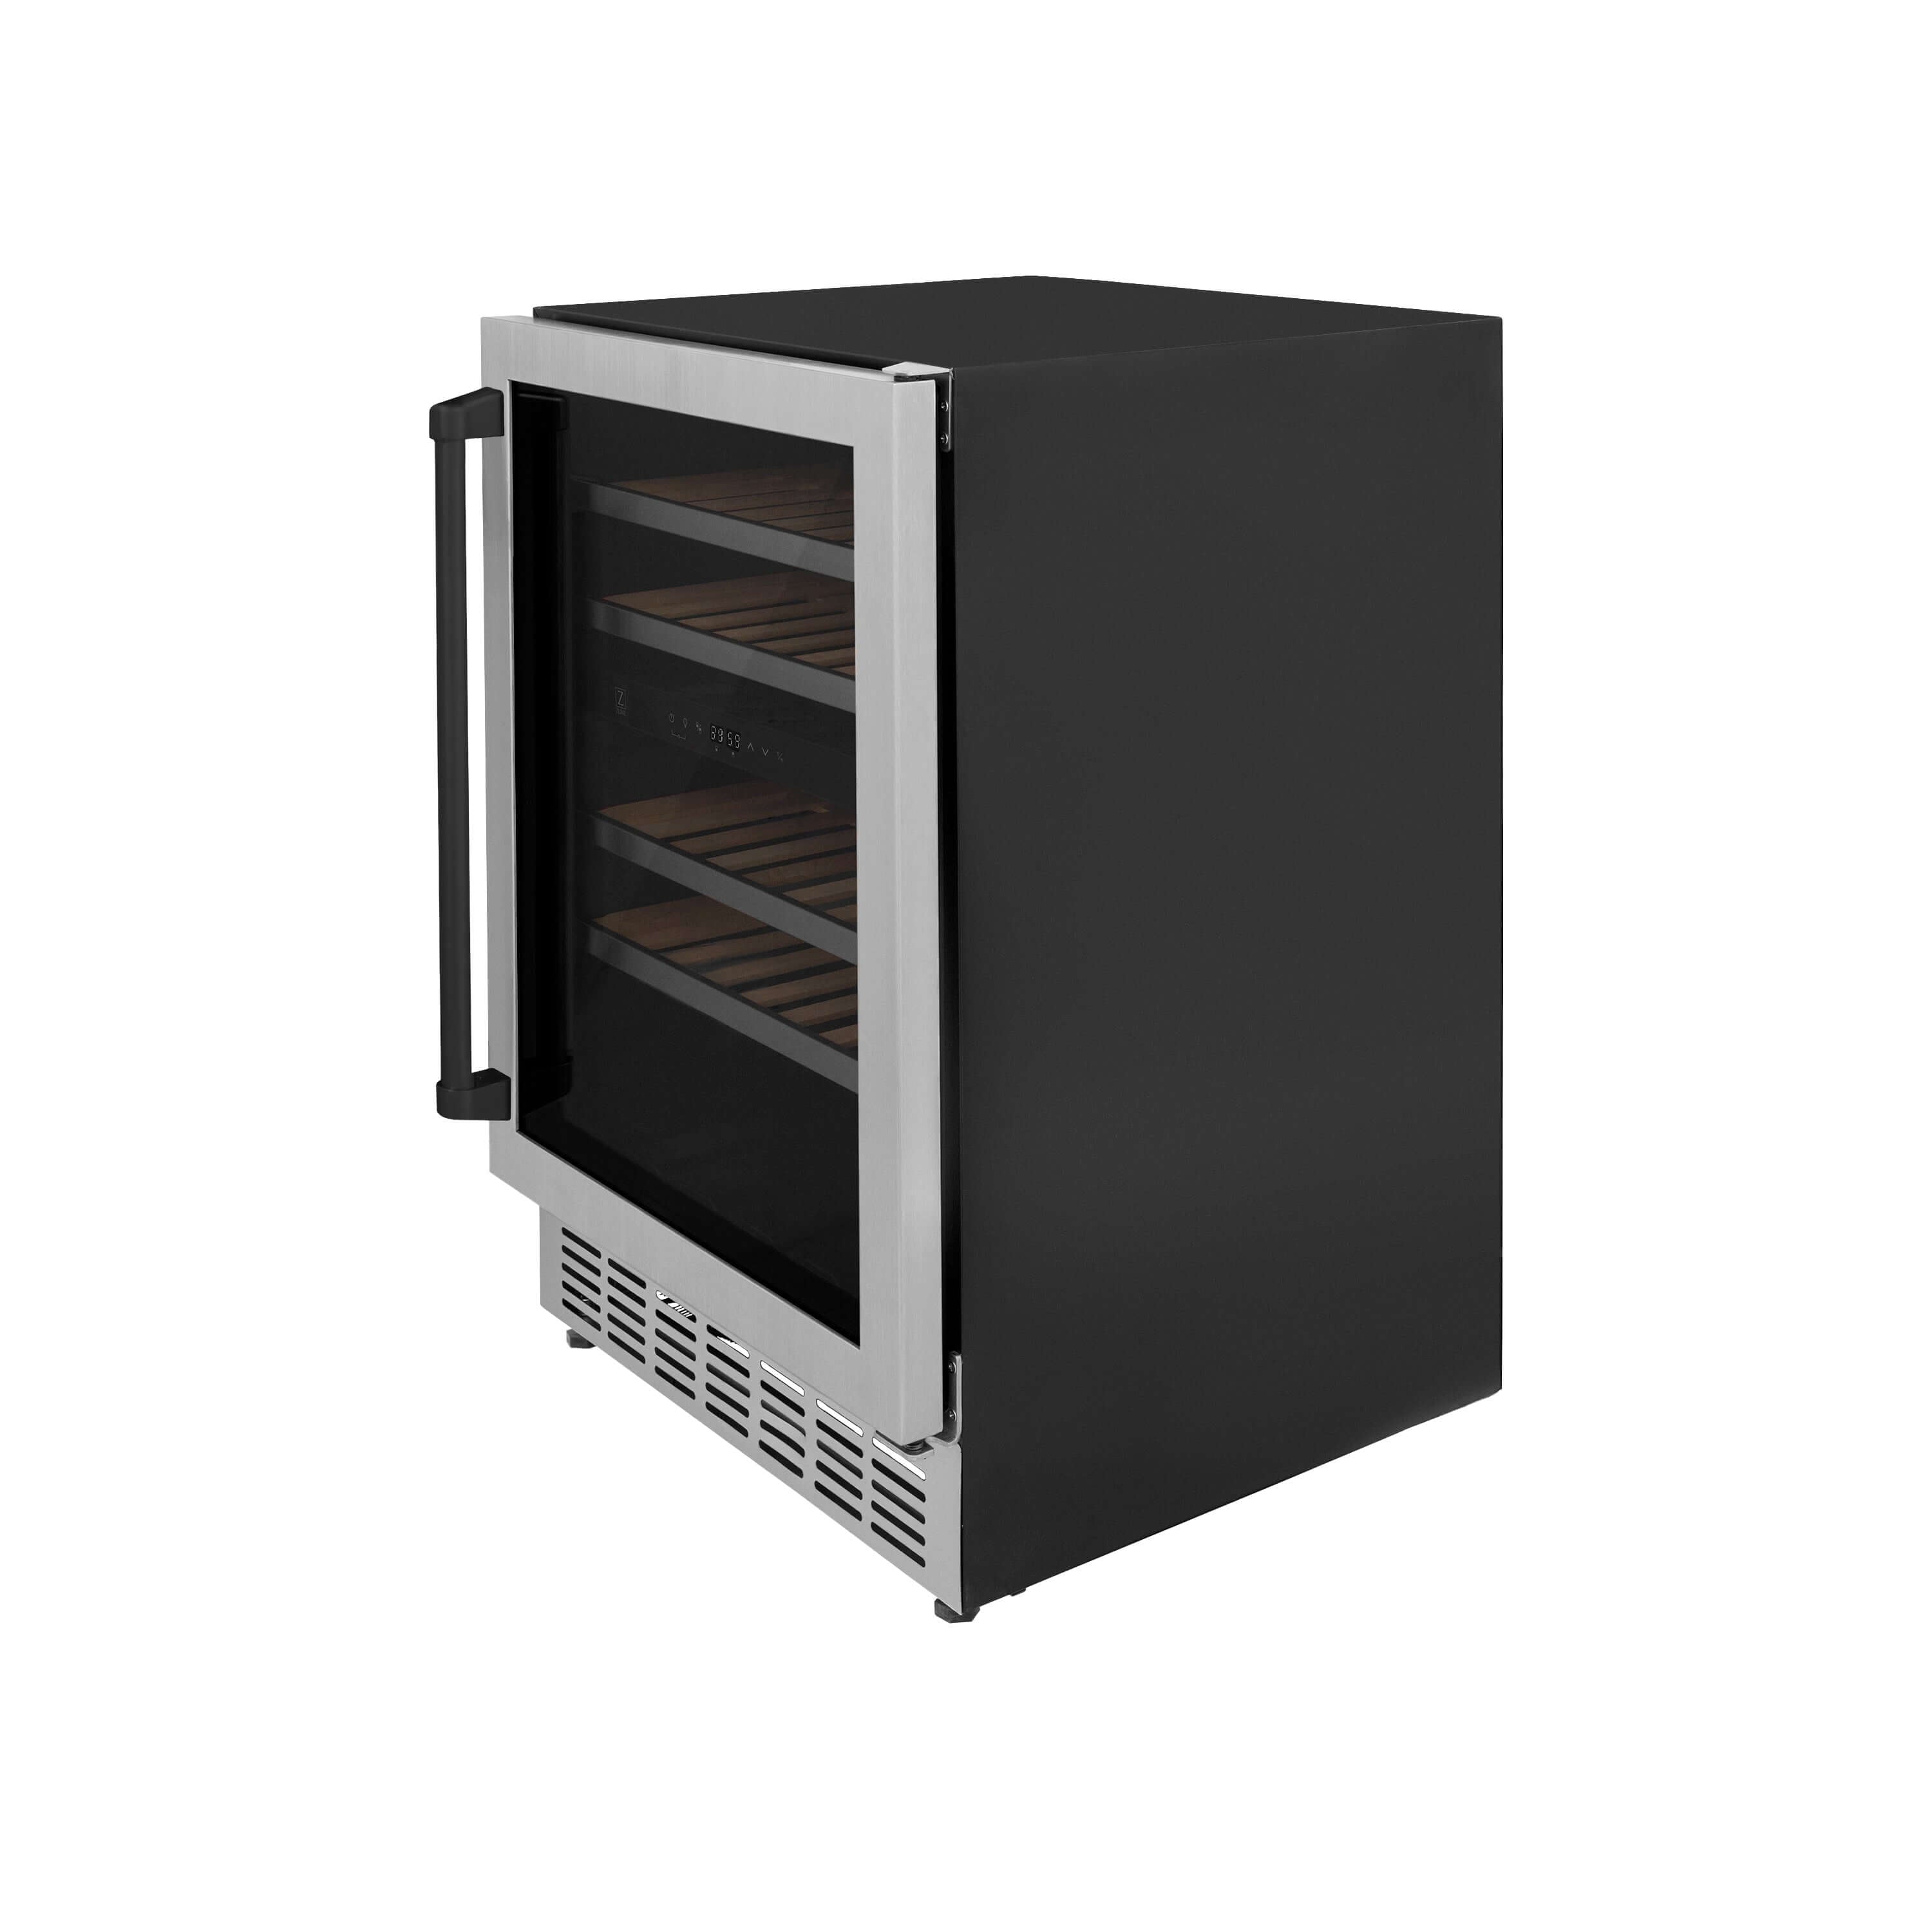 ZLINE Autograph Edition 24 in. Monument Dual Zone 44-Bottle Wine Cooler in Stainless Steel with Matte Black Accents (RWVZ-UD-24-MB) side, closed.